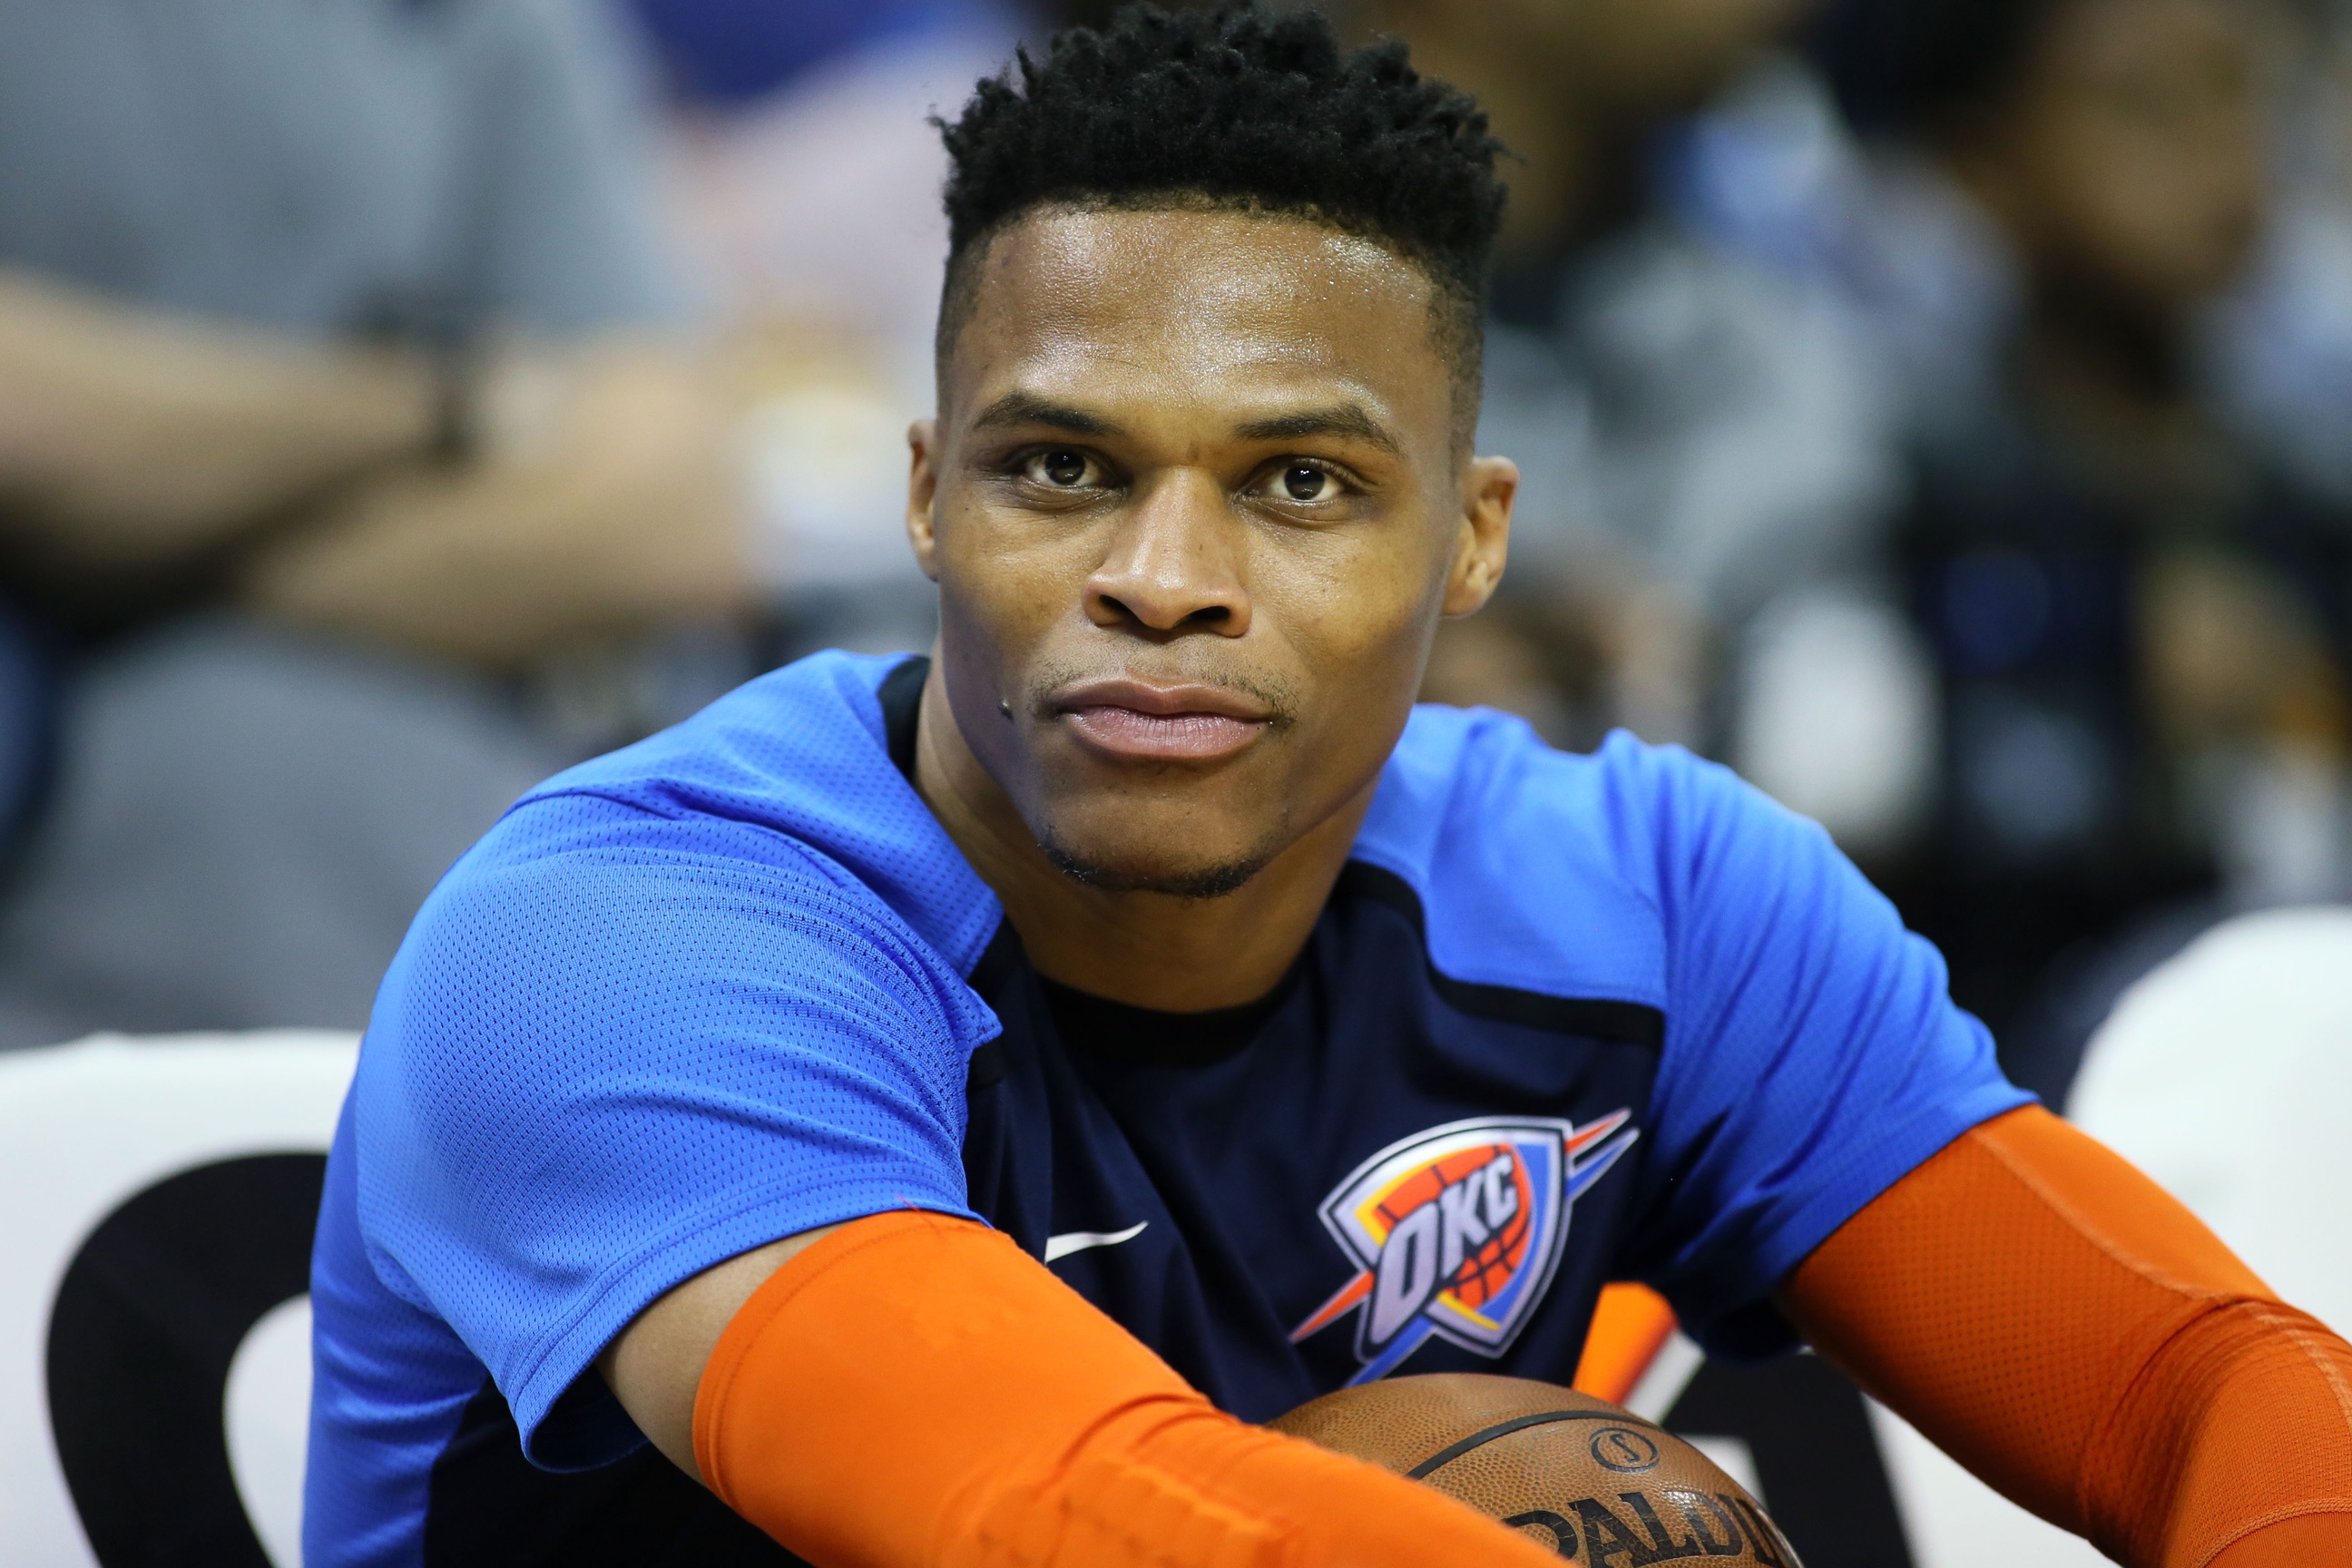 Russell Westbrook honors Nipsey Hussle after historic game